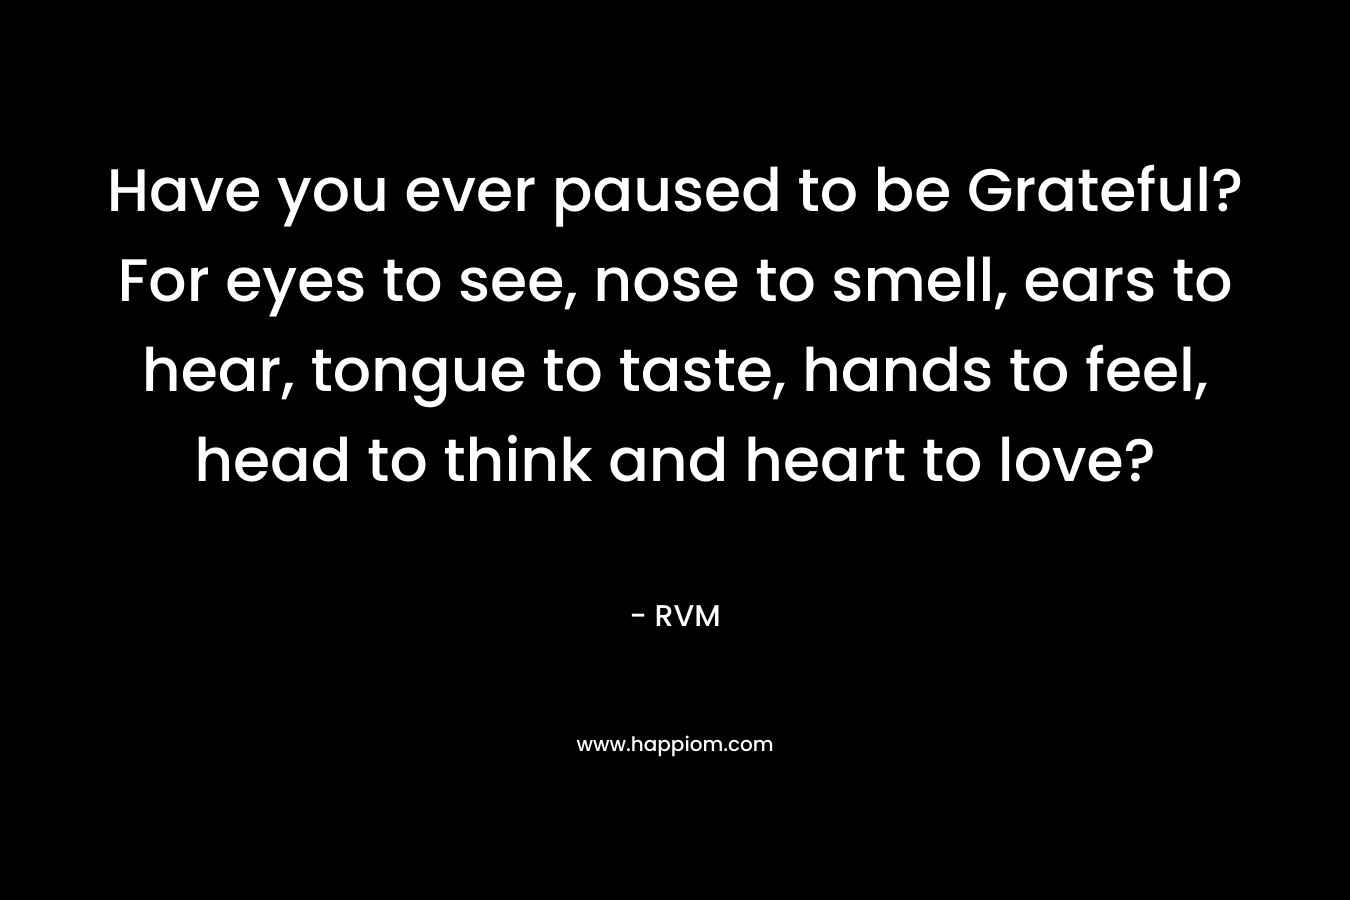 Have you ever paused to be Grateful? For eyes to see, nose to smell, ears to hear, tongue to taste, hands to feel, head to think and heart to love? – RVM